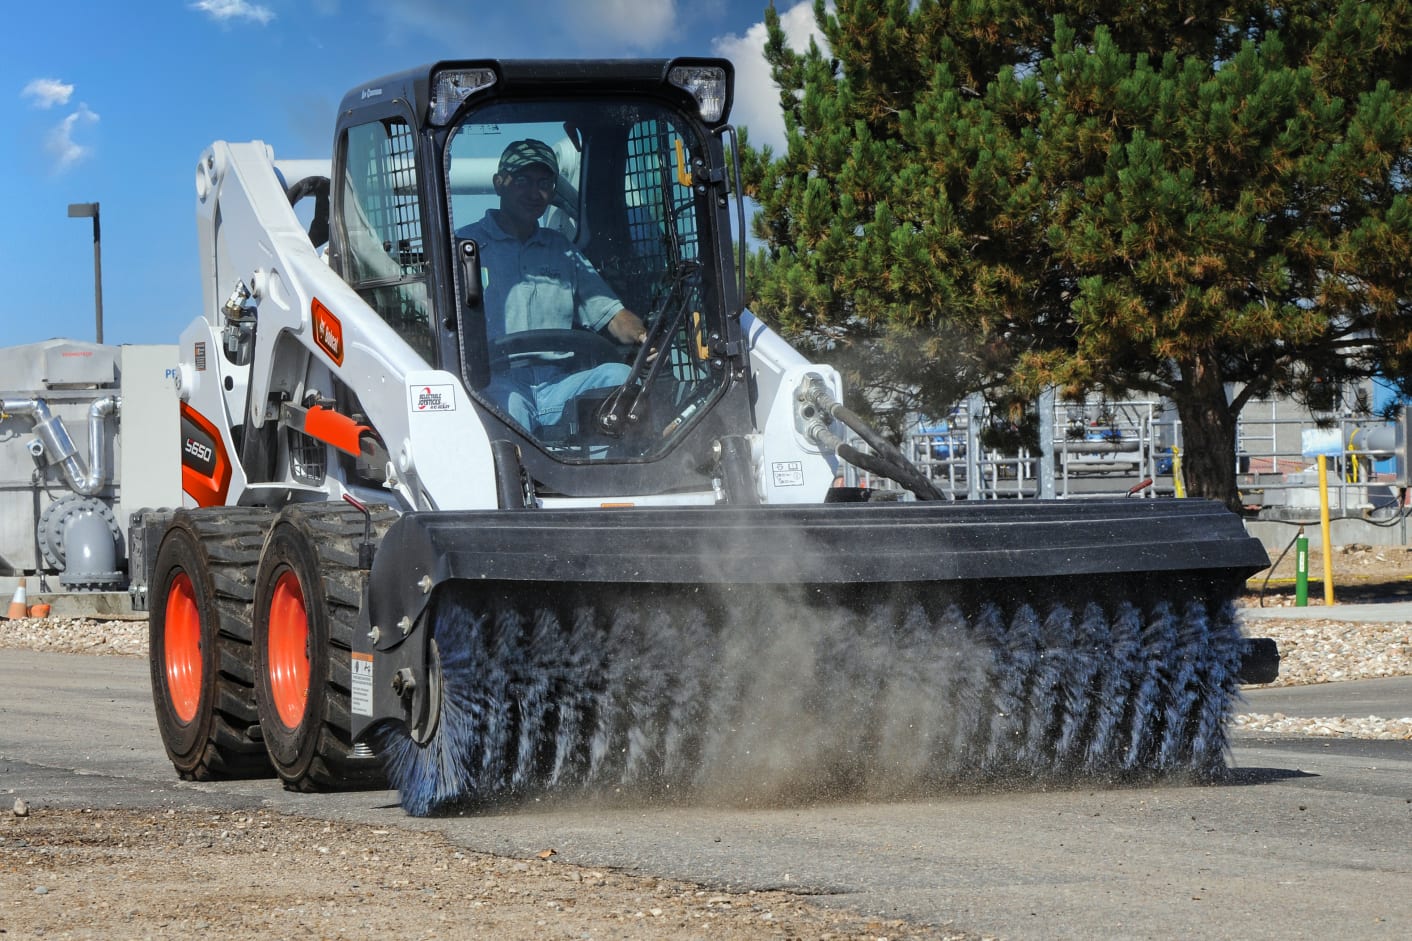 Browse Specs and more for the S650 Skid-Steer Loader - Bobcat of the Rockies